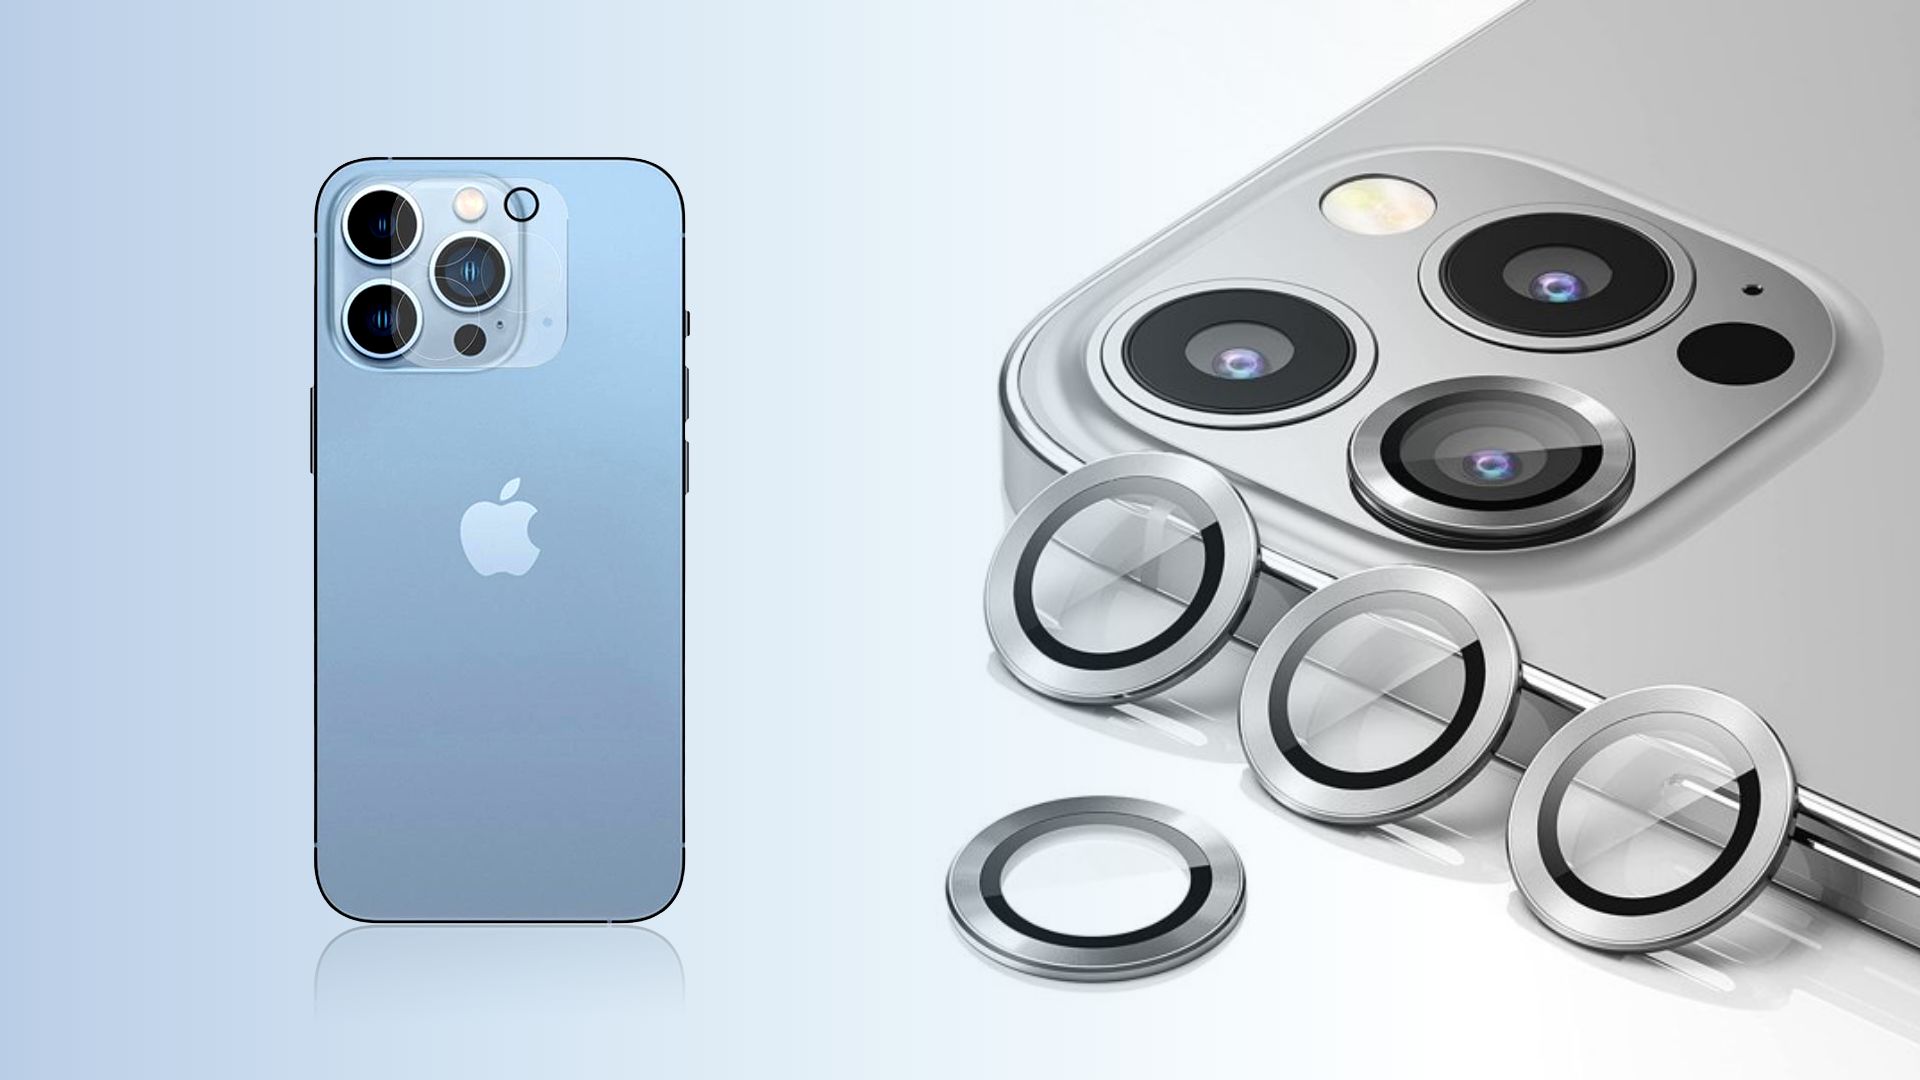 WSKEN camera lens protector for iPhone 13 Pro